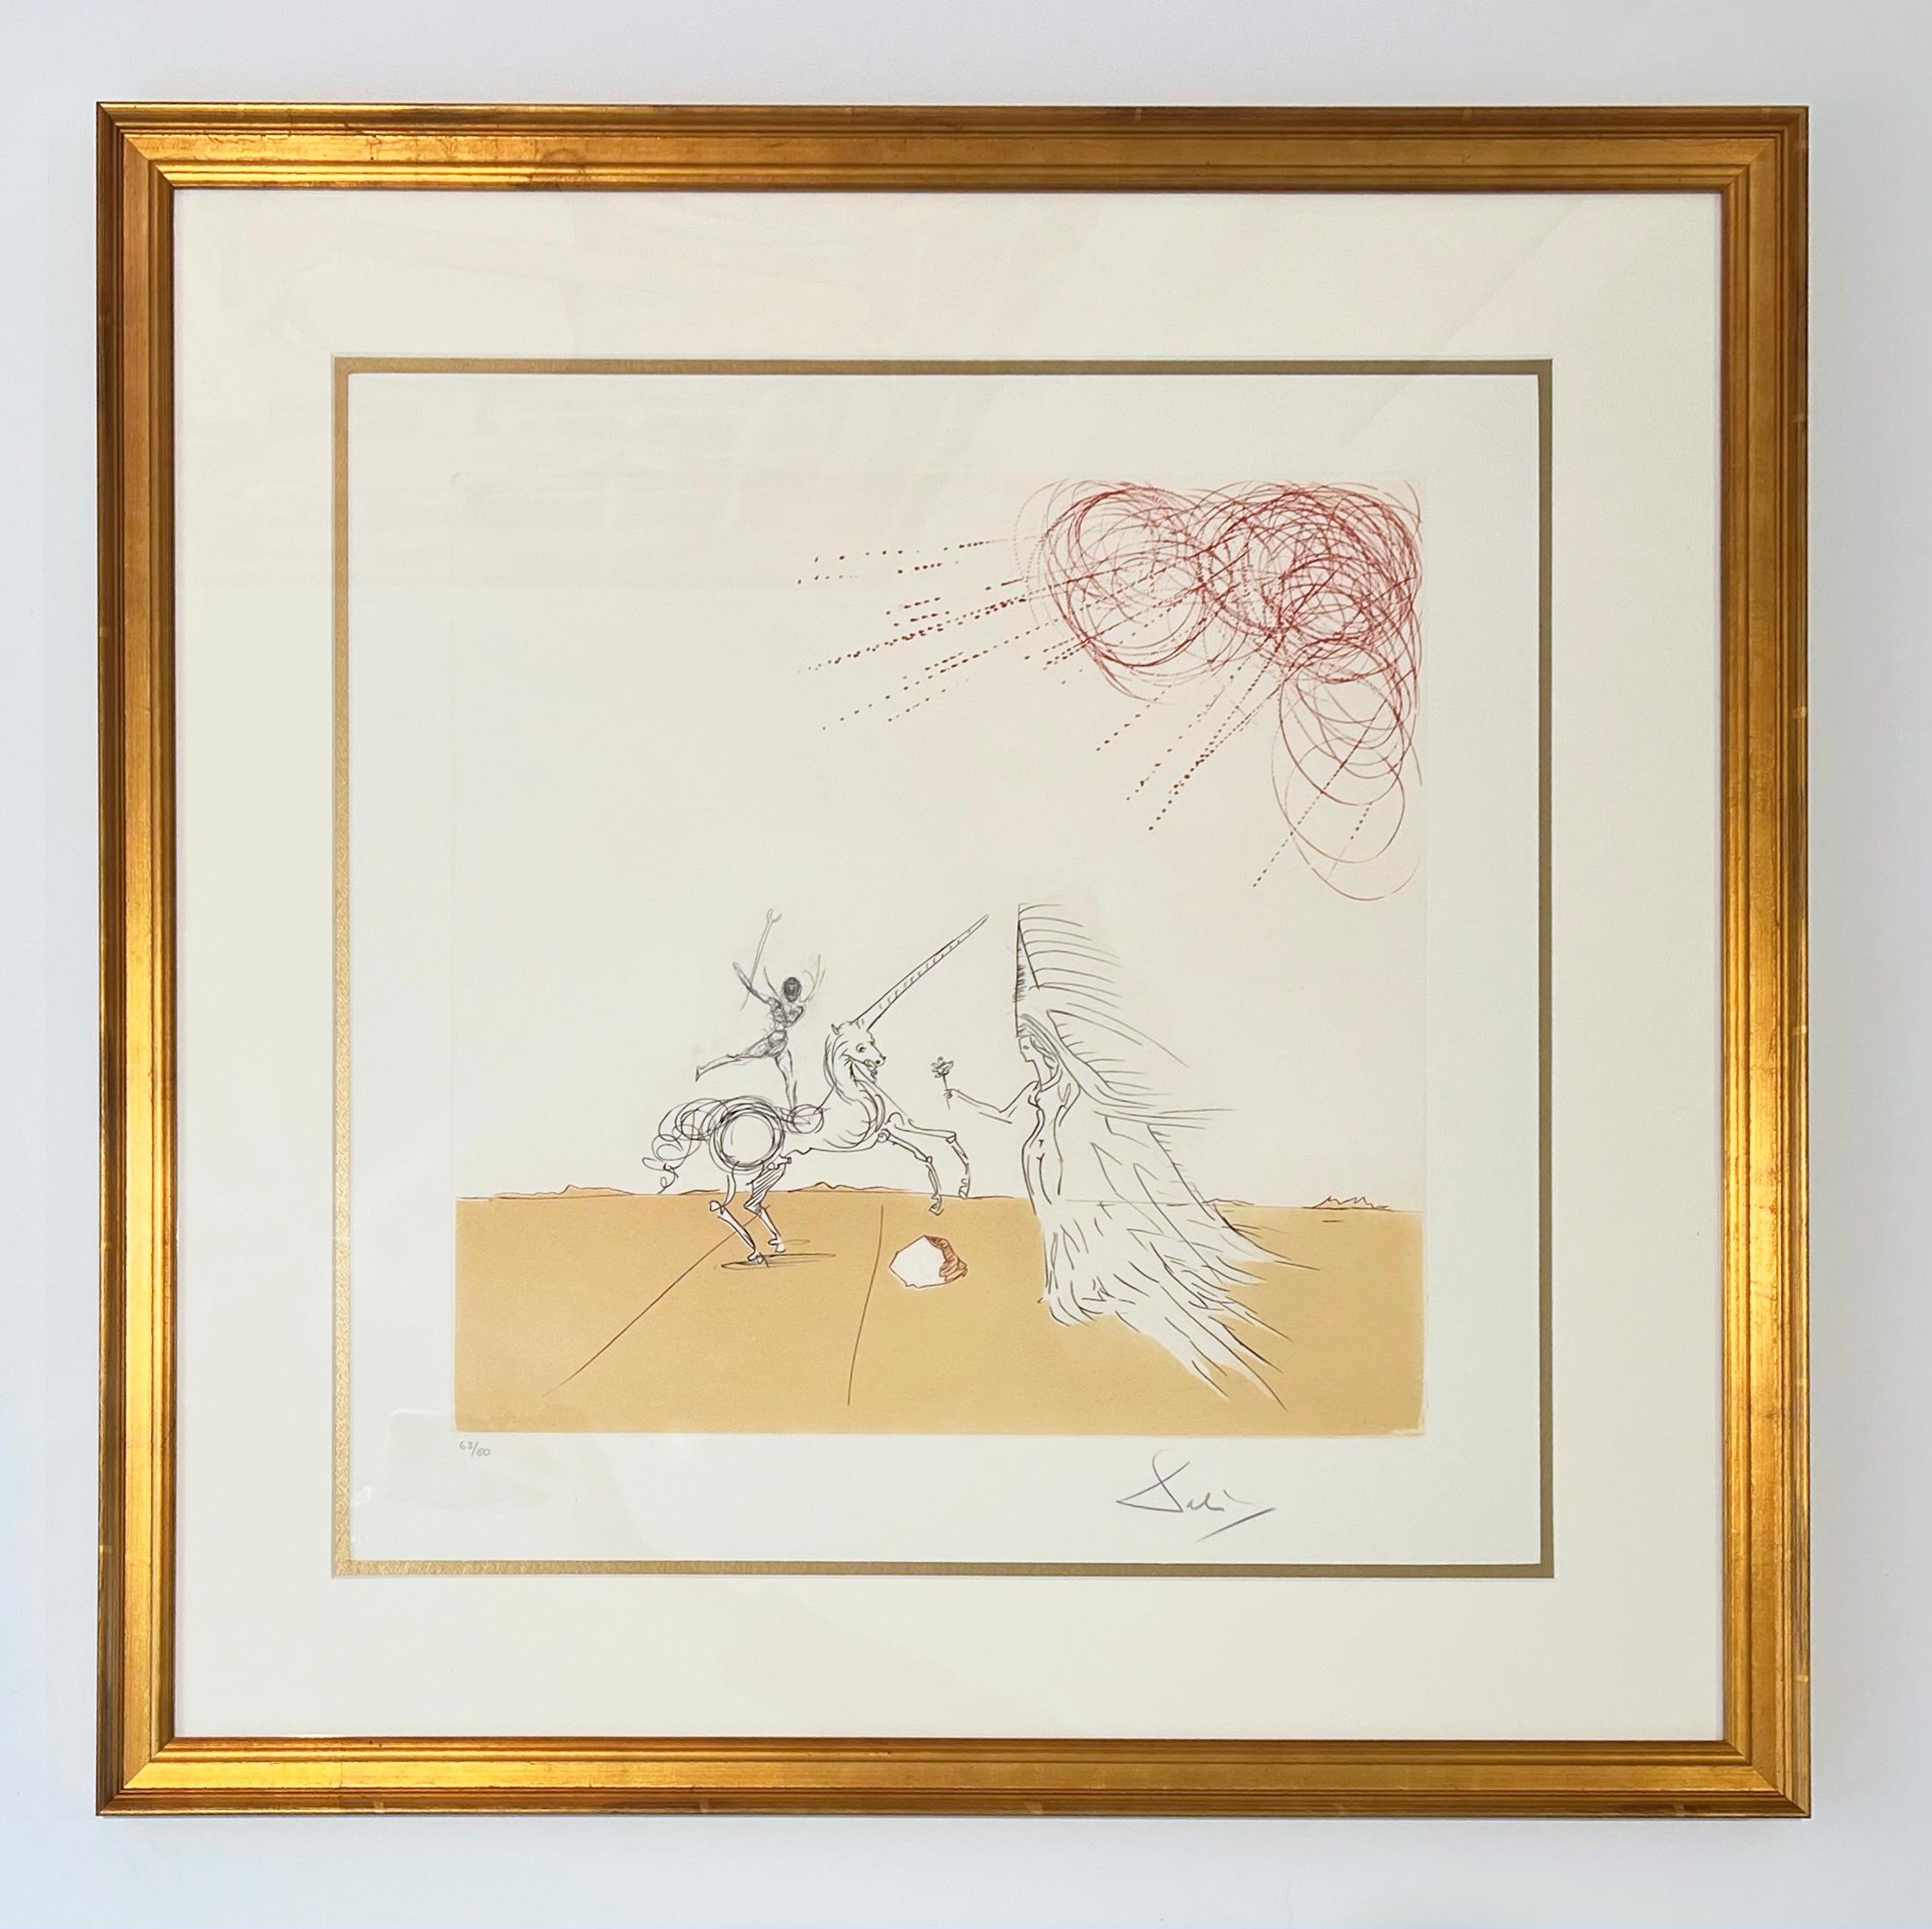 Désert fabuleux from dahlia, from Neuf Paysages - Print by Salvador Dalí